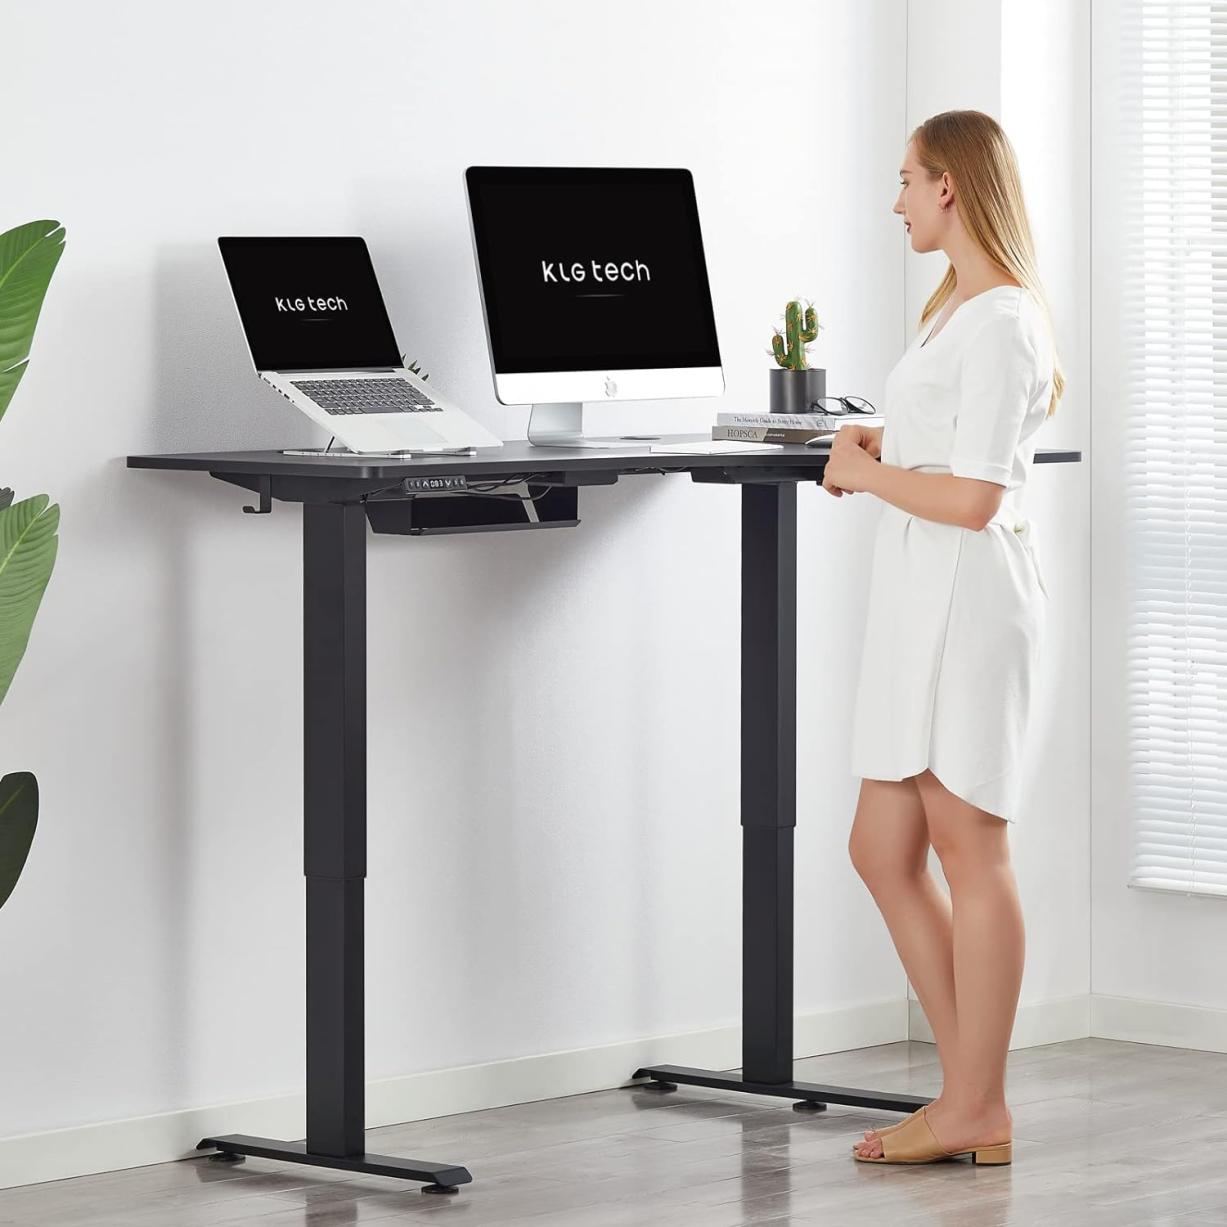 How to Use an Electric Standing Desk Safely and Effectively?